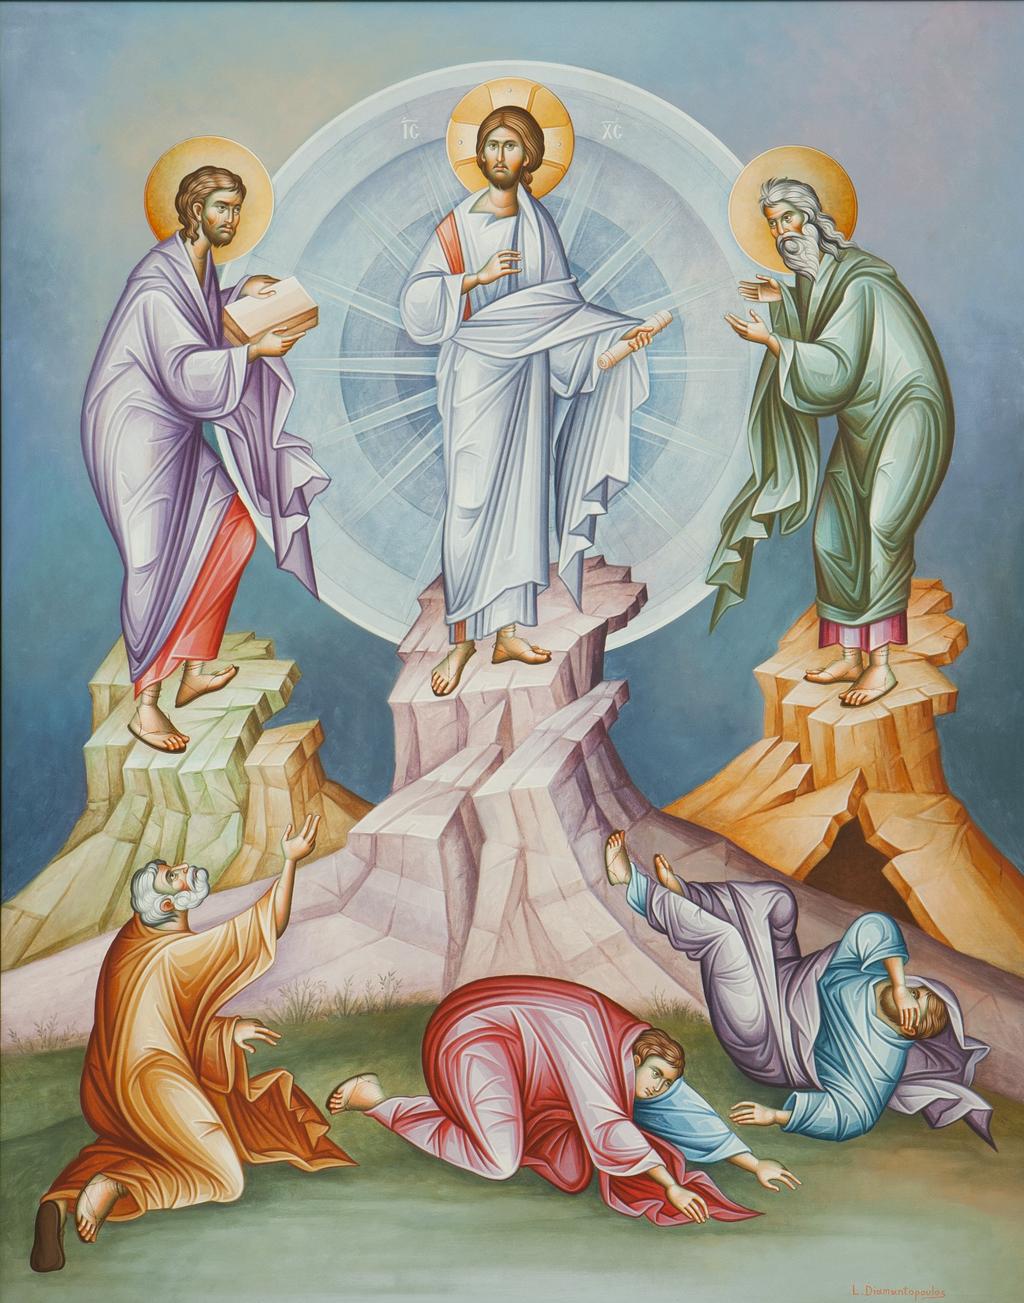 Saturday, August 6, 2016 Feast of the Transfiguration of our Lord and Savior Jesus Christ Transfiguration of our Lord Greek Orthodox Church 414 St.